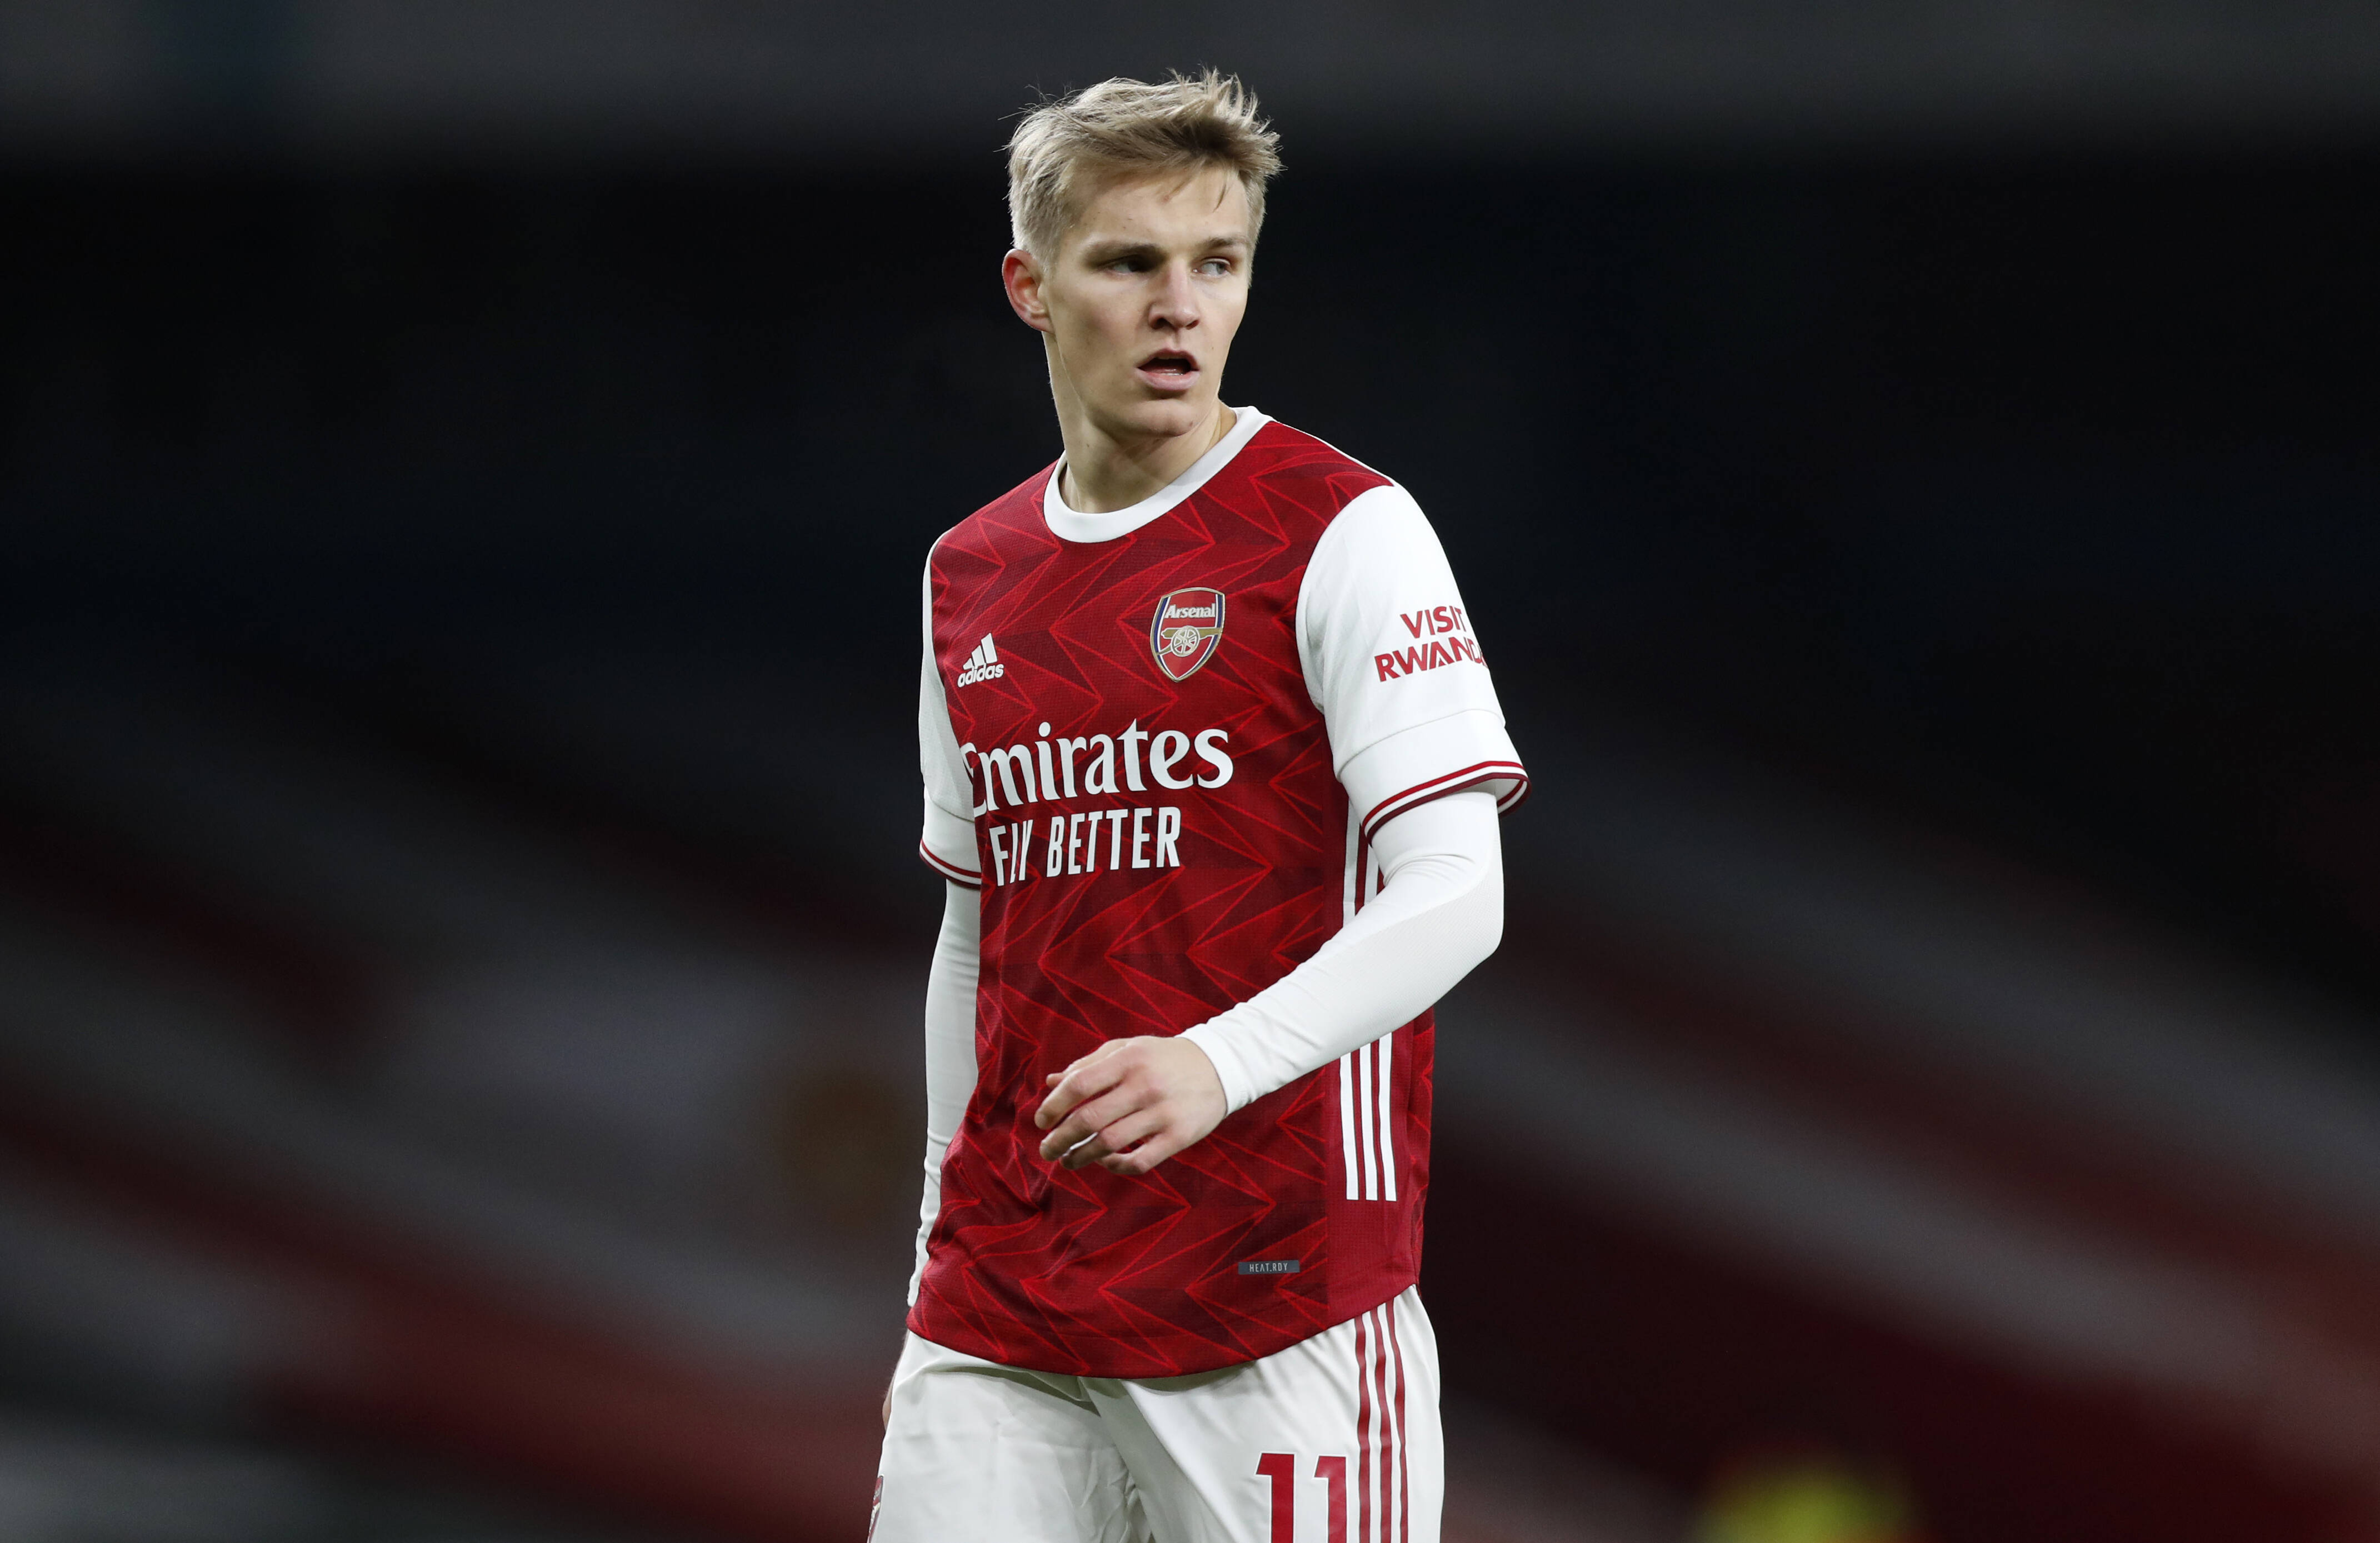 PSG Mercato: Arsenal Fears the Potential Interest From Paris SG for Martin Odegaard - PSG Talk